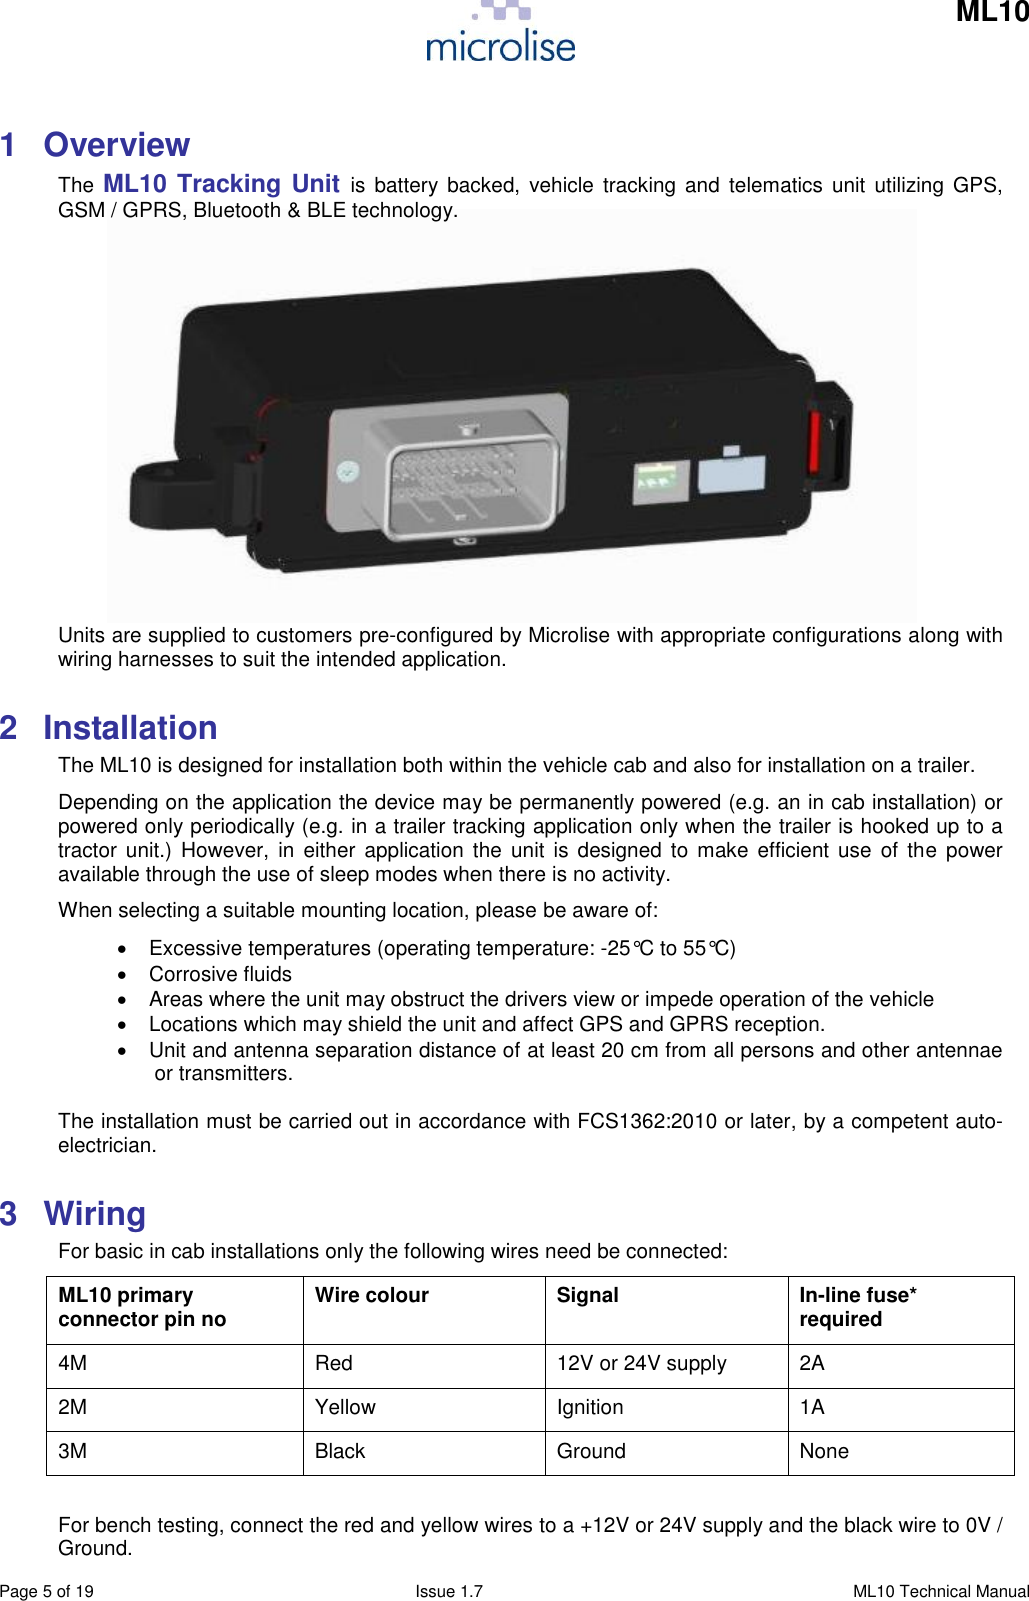     ML10    Page 5 of 19  Issue 1.7  ML10 Technical Manual 1  Overview The  ML10 Tracking Unit is  battery backed,  vehicle  tracking and  telematics unit  utilizing GPS, GSM / GPRS, Bluetooth &amp; BLE technology.             Units are supplied to customers pre-configured by Microlise with appropriate configurations along with wiring harnesses to suit the intended application. 2  Installation The ML10 is designed for installation both within the vehicle cab and also for installation on a trailer.  Depending on the application the device may be permanently powered (e.g. an in cab installation) or powered only periodically (e.g. in a trailer tracking application only when the trailer is hooked up to a tractor  unit.) However,  in  either  application  the  unit  is  designed to  make efficient use  of the  power available through the use of sleep modes when there is no activity. When selecting a suitable mounting location, please be aware of:   Excessive temperatures (operating temperature: -25°C to 55°C)   Corrosive fluids    Areas where the unit may obstruct the drivers view or impede operation of the vehicle   Locations which may shield the unit and affect GPS and GPRS reception.   Unit and antenna separation distance of at least 20 cm from all persons and other antennae or transmitters.  The installation must be carried out in accordance with FCS1362:2010 or later, by a competent auto-electrician. 3  Wiring For basic in cab installations only the following wires need be connected: ML10 primary connector pin no Wire colour Signal In-line fuse* required  4M Red 12V or 24V supply 2A 2M Yellow Ignition 1A 3M Black Ground None  For bench testing, connect the red and yellow wires to a +12V or 24V supply and the black wire to 0V / Ground. 